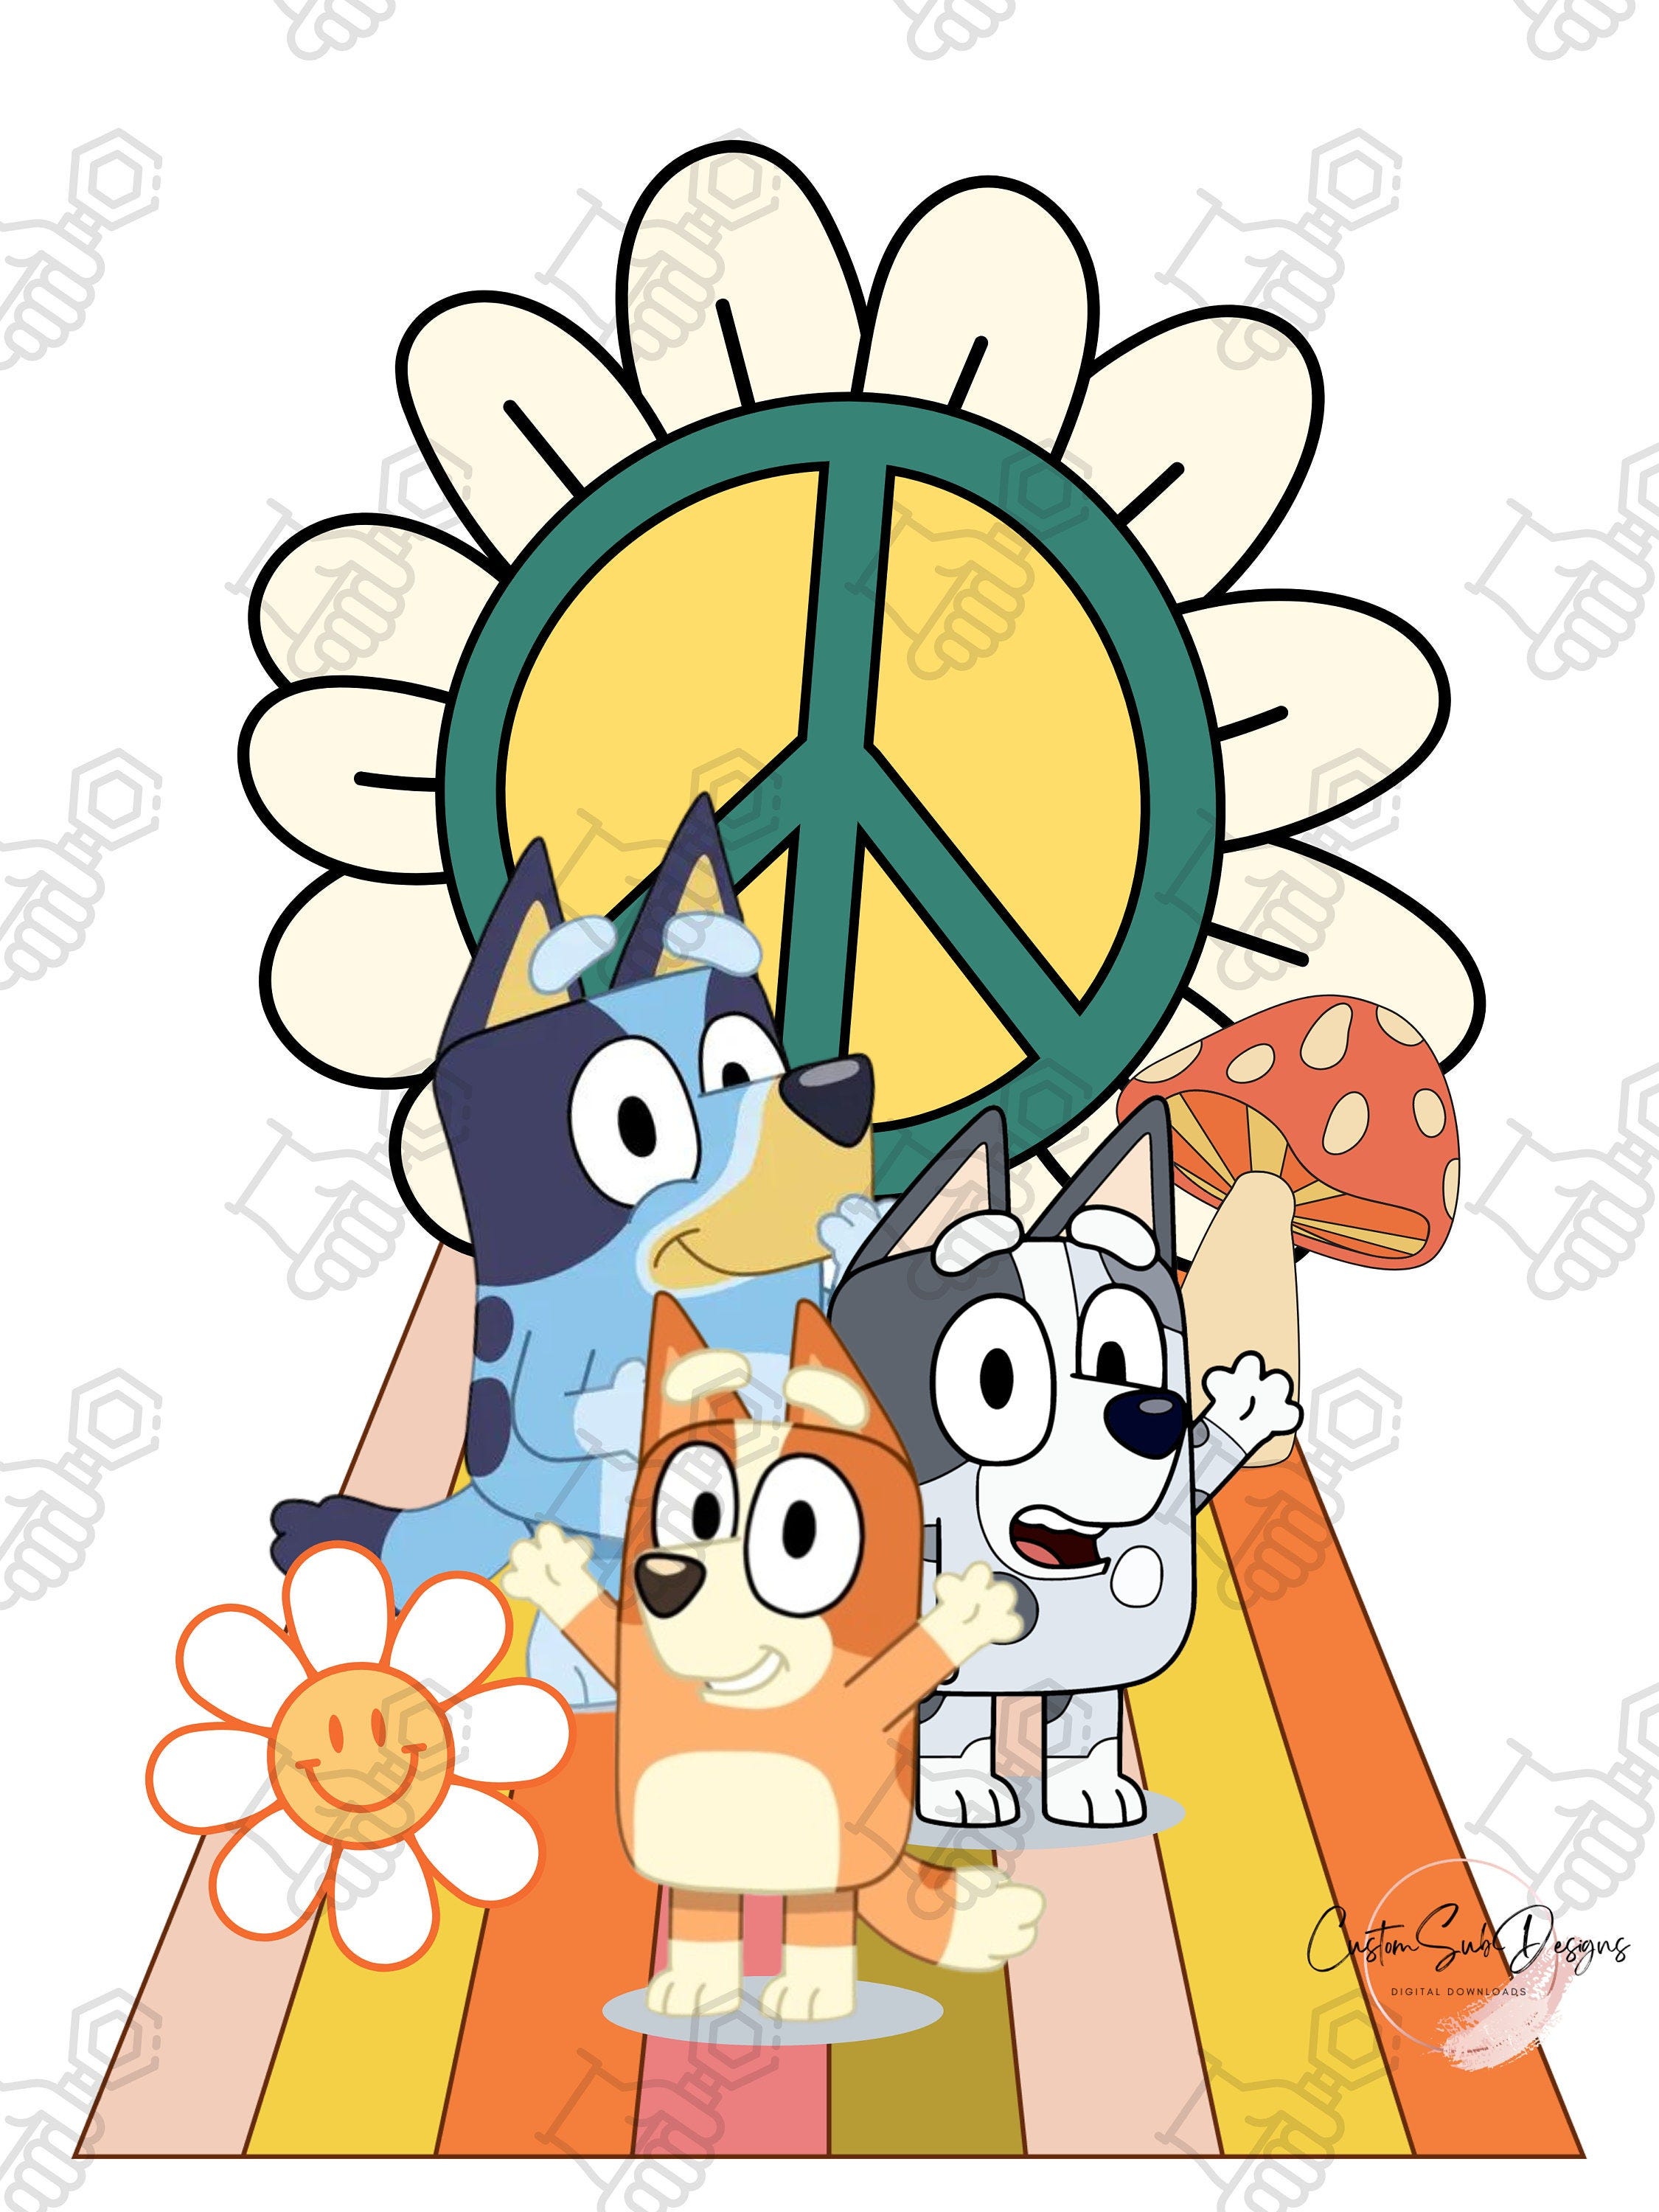 Blue Dog cartoon - Hippy- retro- peace - sublimation - fall autumn mushrooms - png jpg - commercial small business and commercial